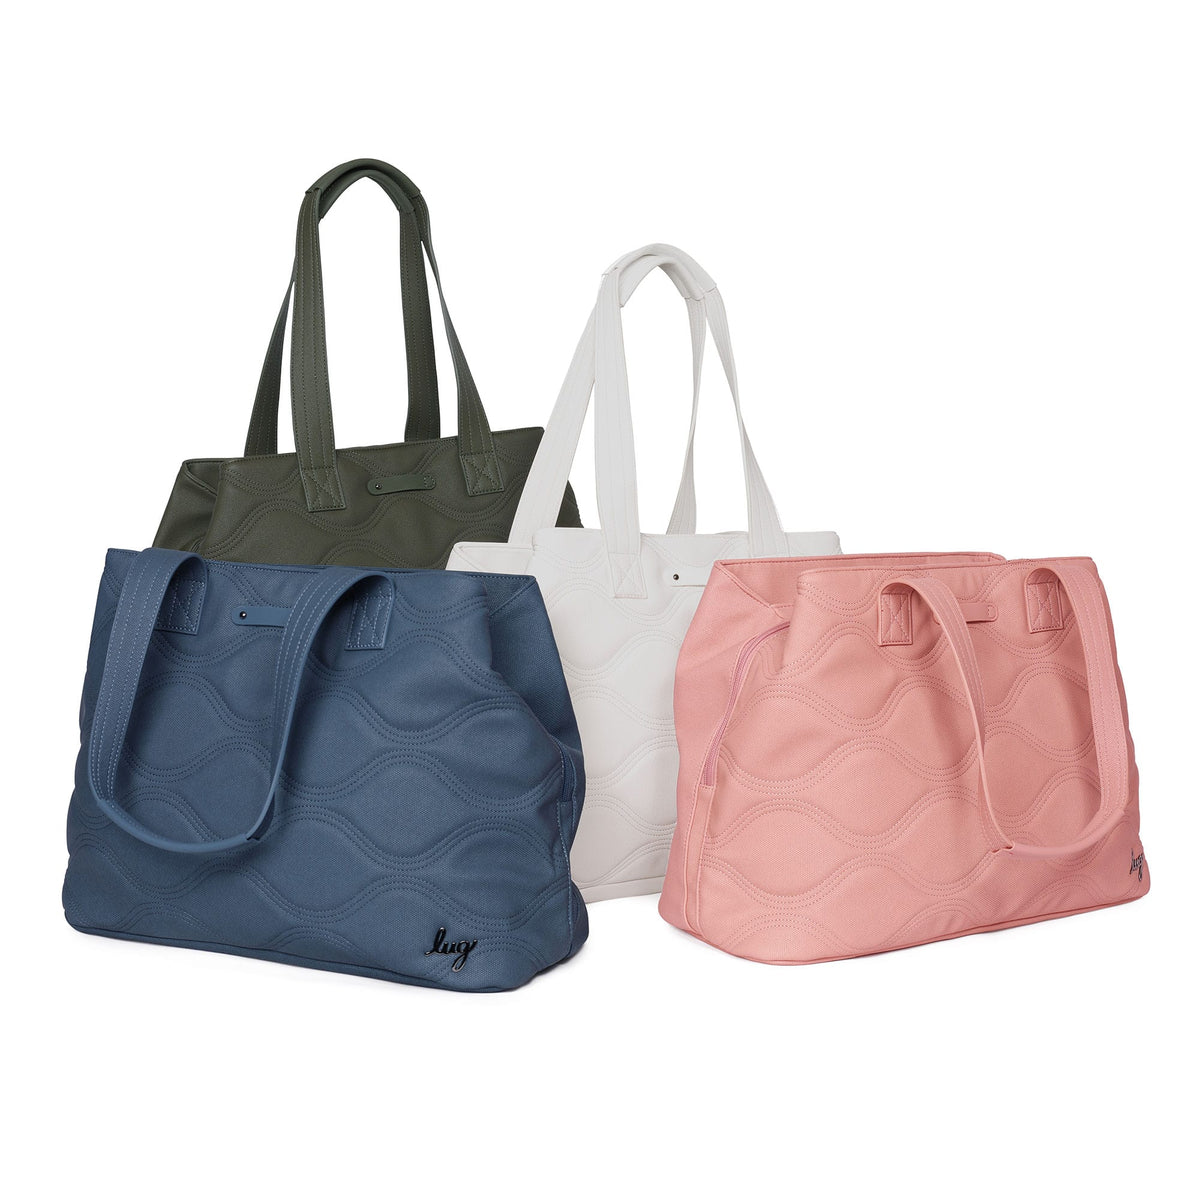 Matte Luxe VL Tagged tote 